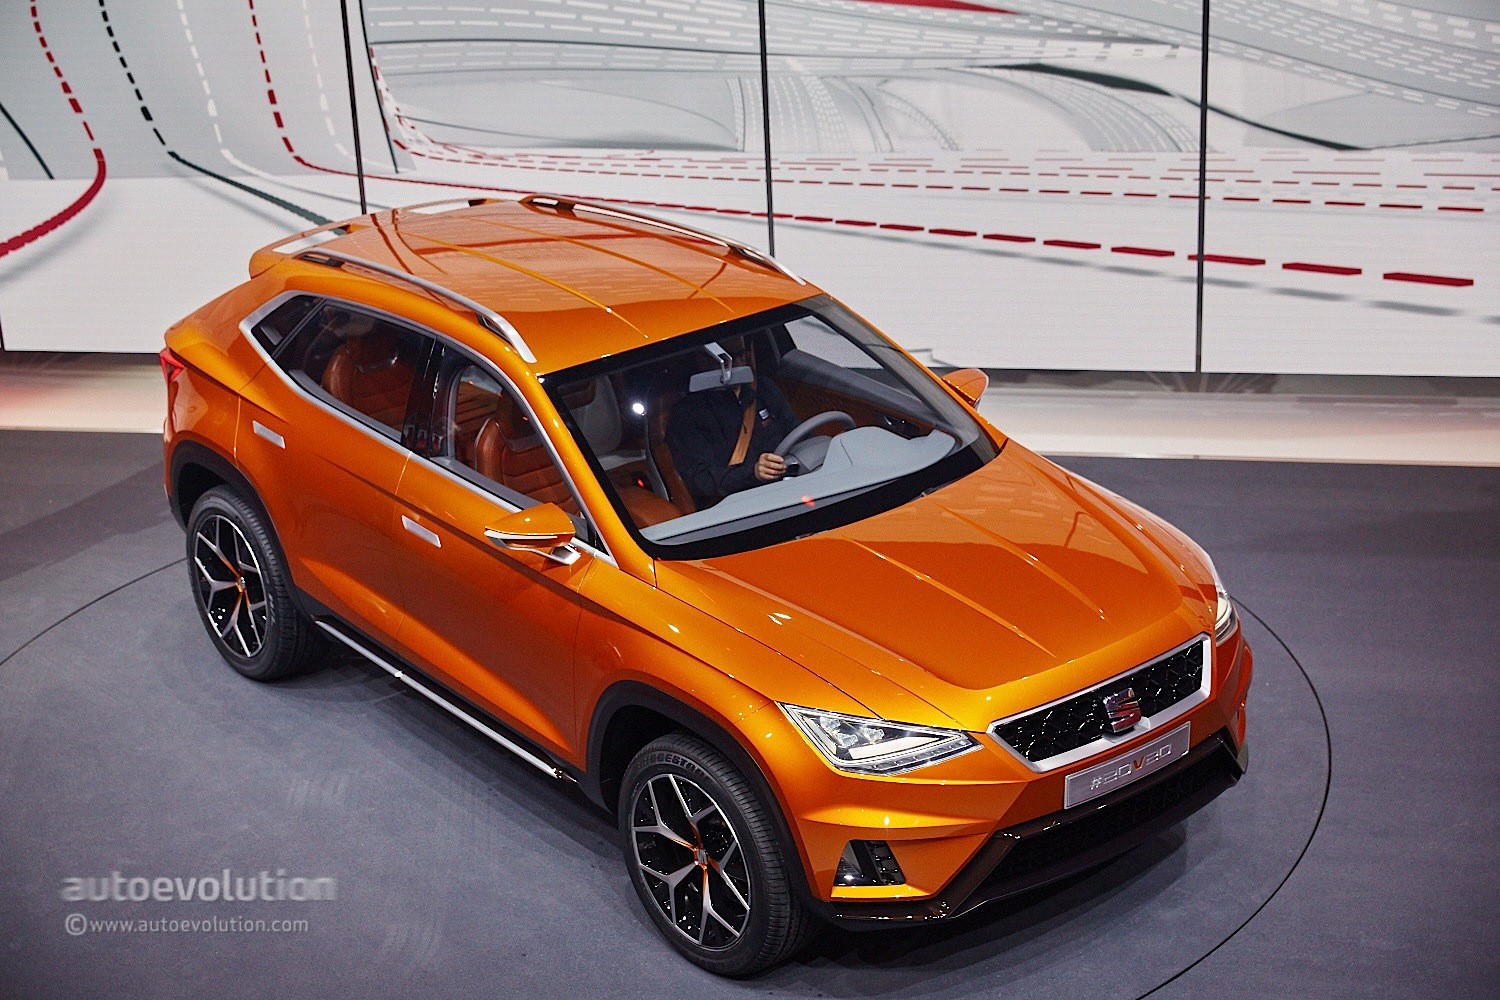 SEAT Prostyle SUV Will Be the First of 4 New Models Coming Until 2017 ...